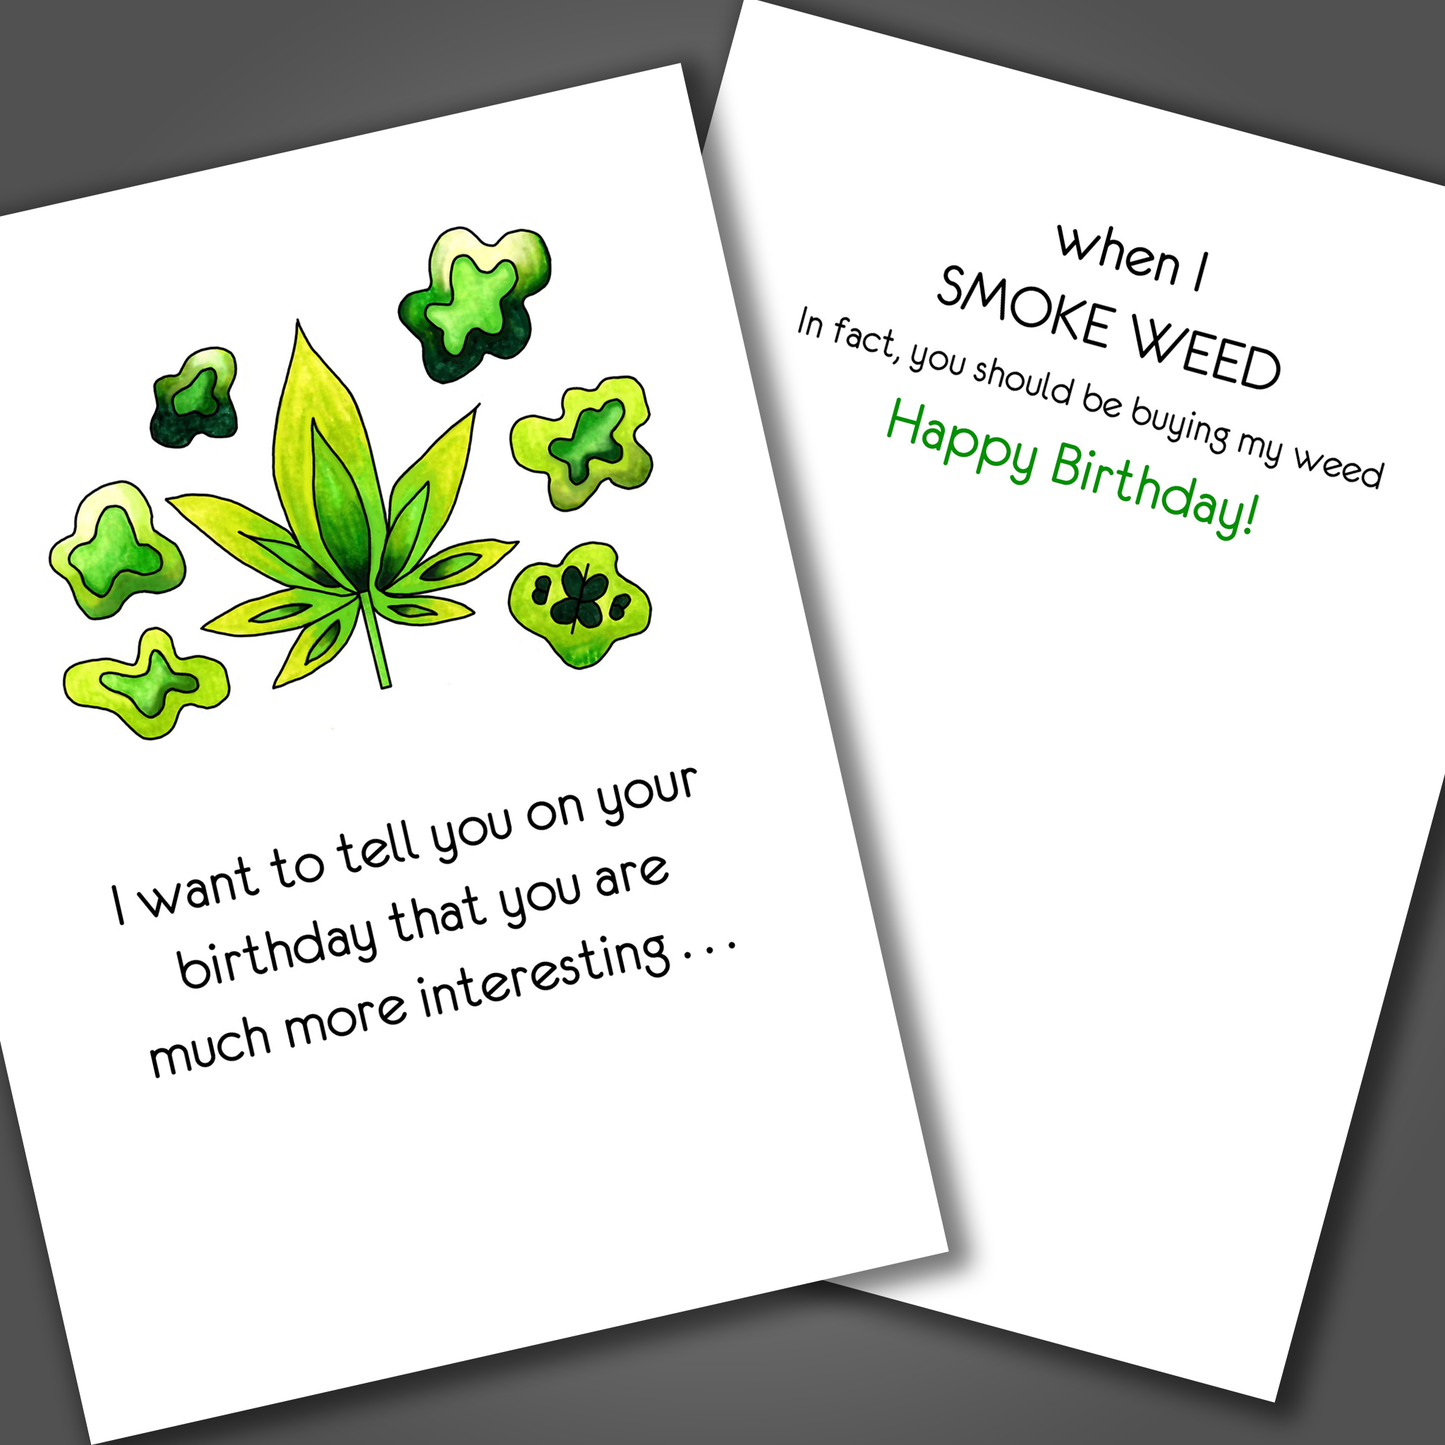 Funny birthday card with a marijuana plant leaf drawn on the front of the card. Inside the card is a funny joke that ends with happy birthday!